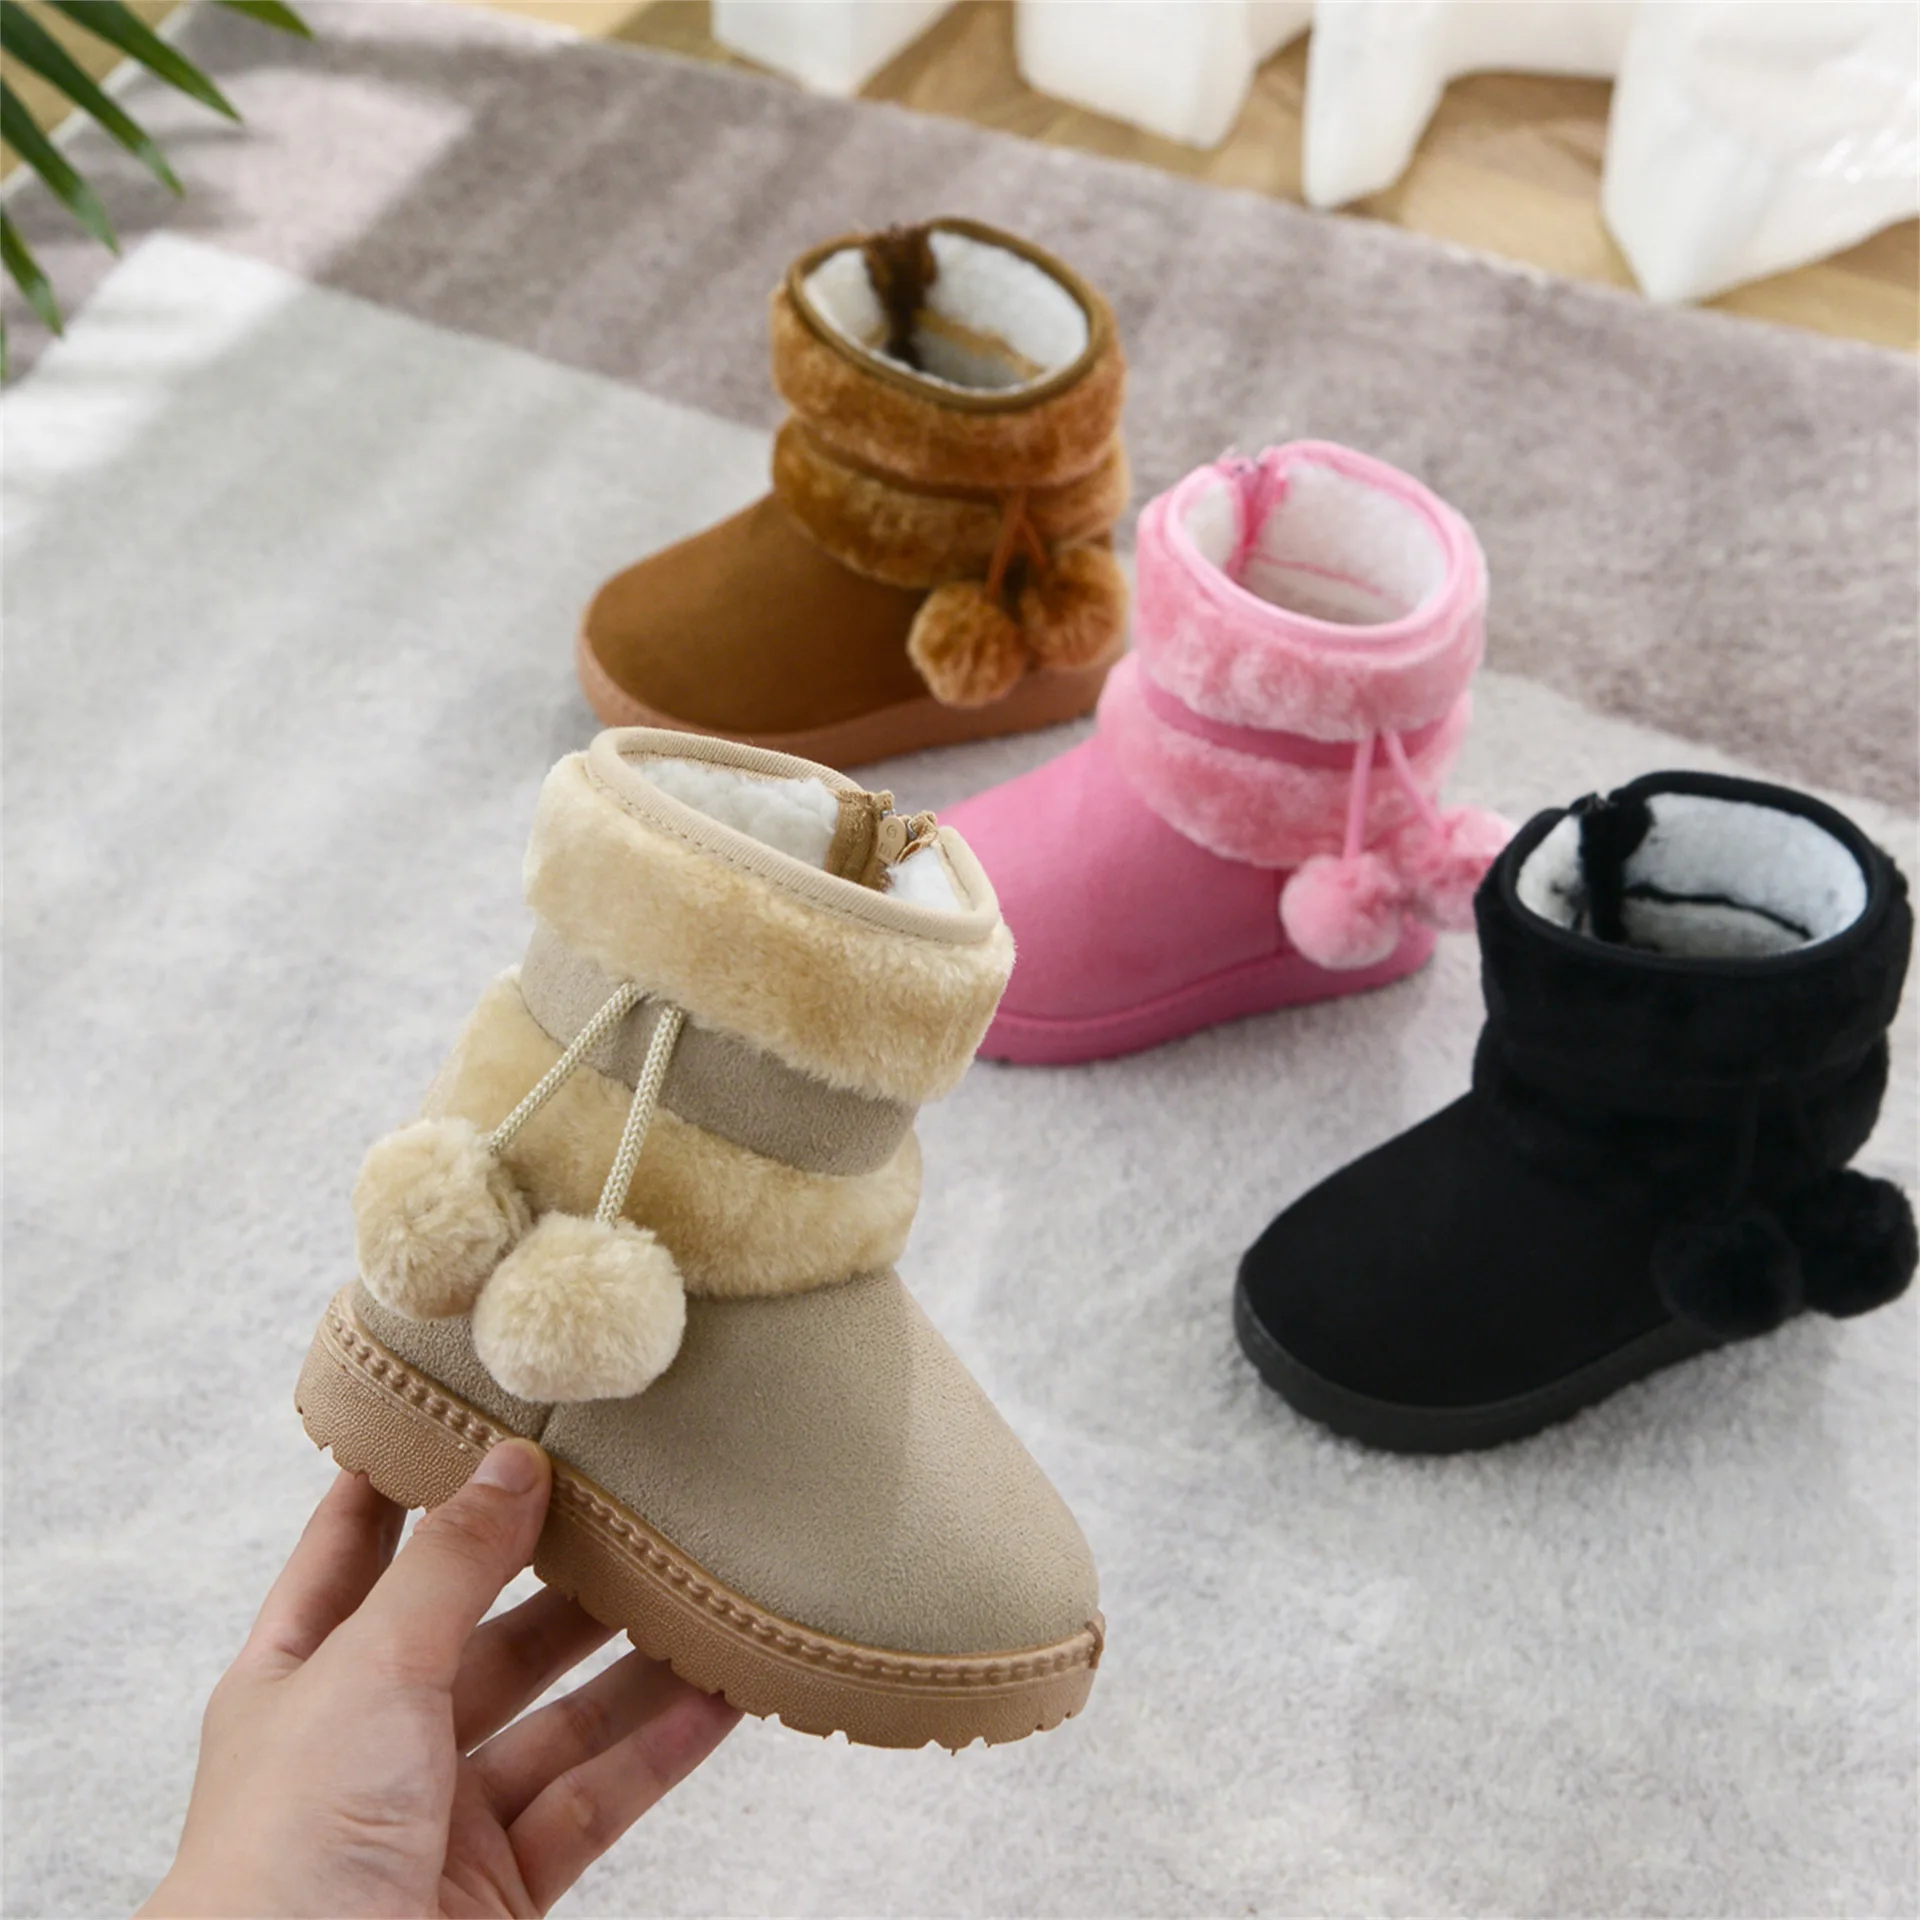 Boys Girls Snow Boots Winter Waterproof Slip Resistant Cold Weather Shoes Toddler Little Kid’s Autumn Winter Boots 22-27